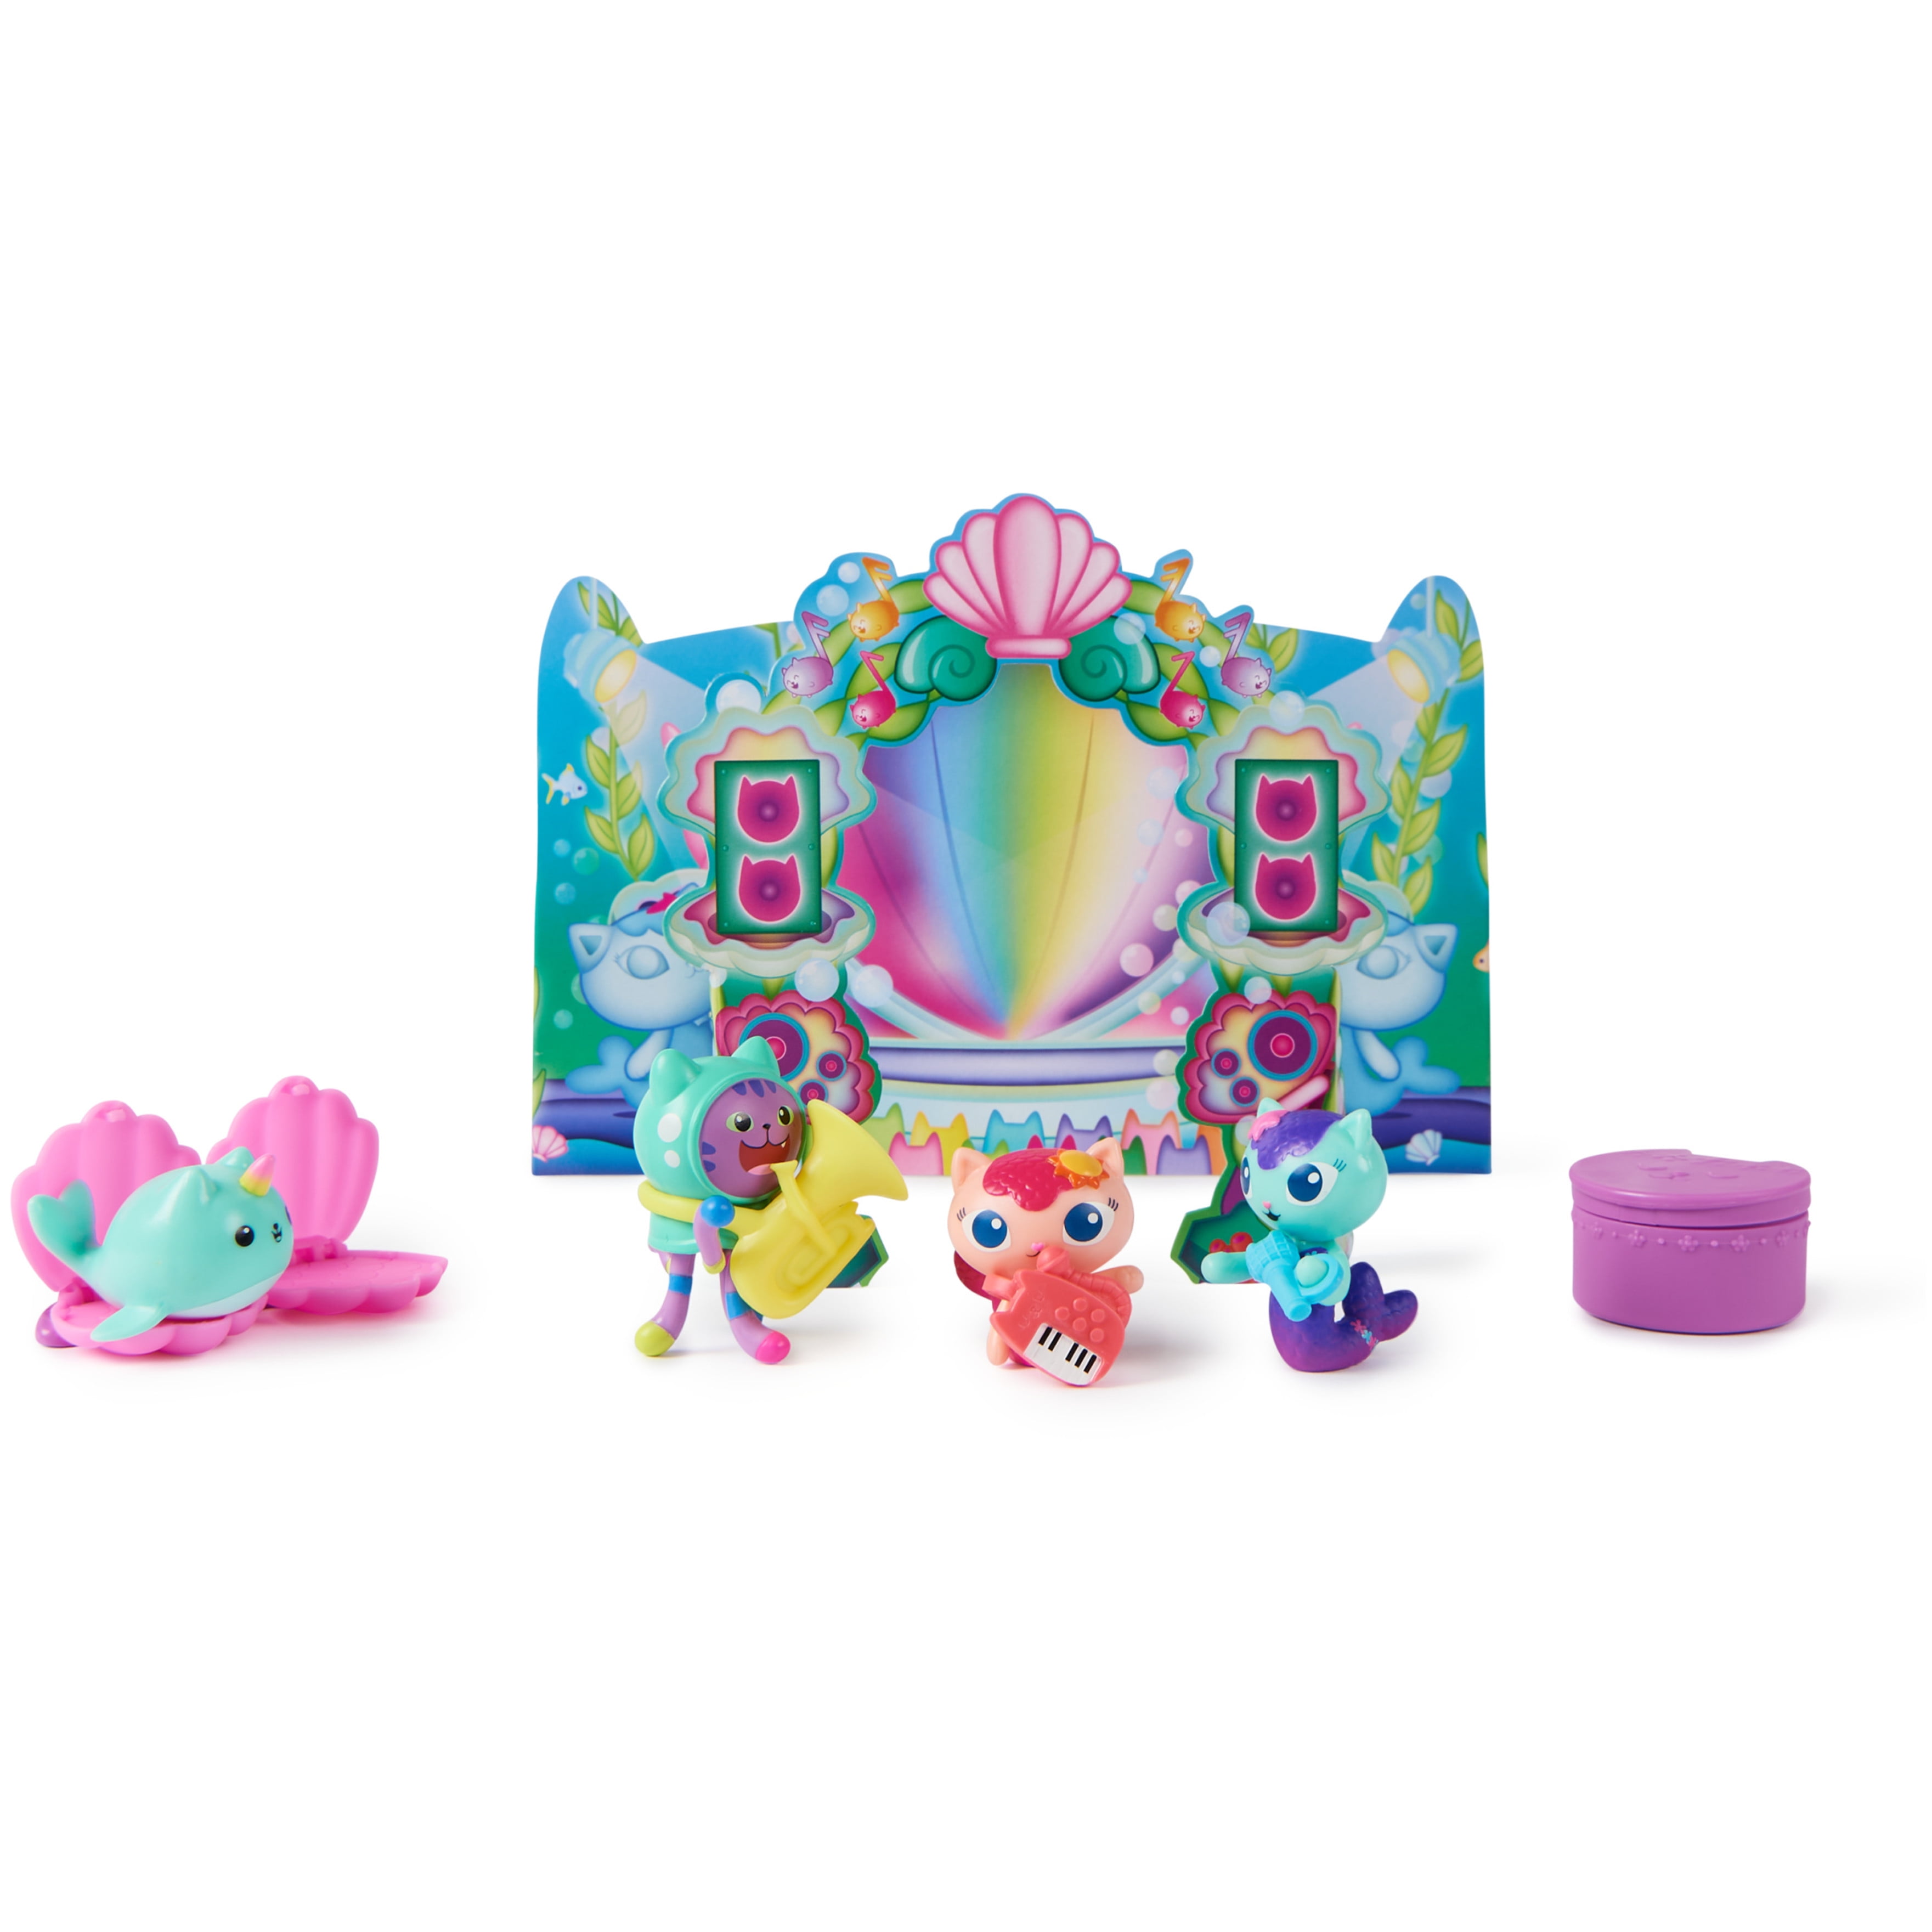 Gabbys Dollhouse, Mermaid-lantis Figure Set with 4 Toy Figures and Dollhouse Furniture, Size: 2.008 inch x 11.496 inch x 8.74 inch